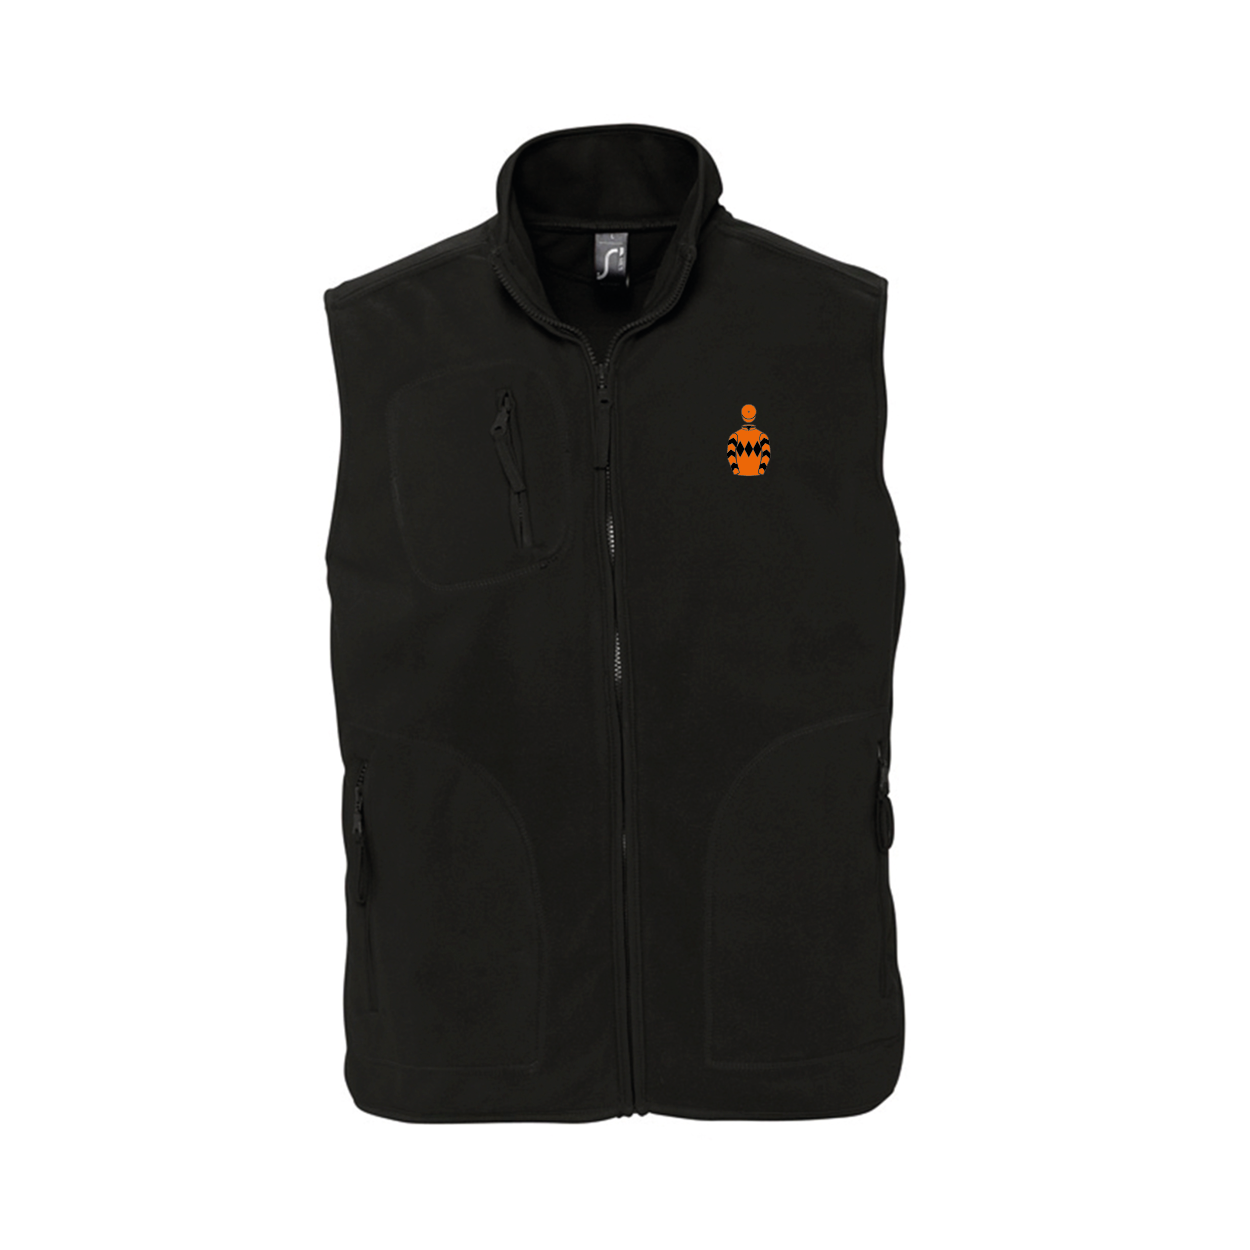 Unisex John and Heather Snook Embroidered Fleece Bodywarmer - Clothing - Hacked Up